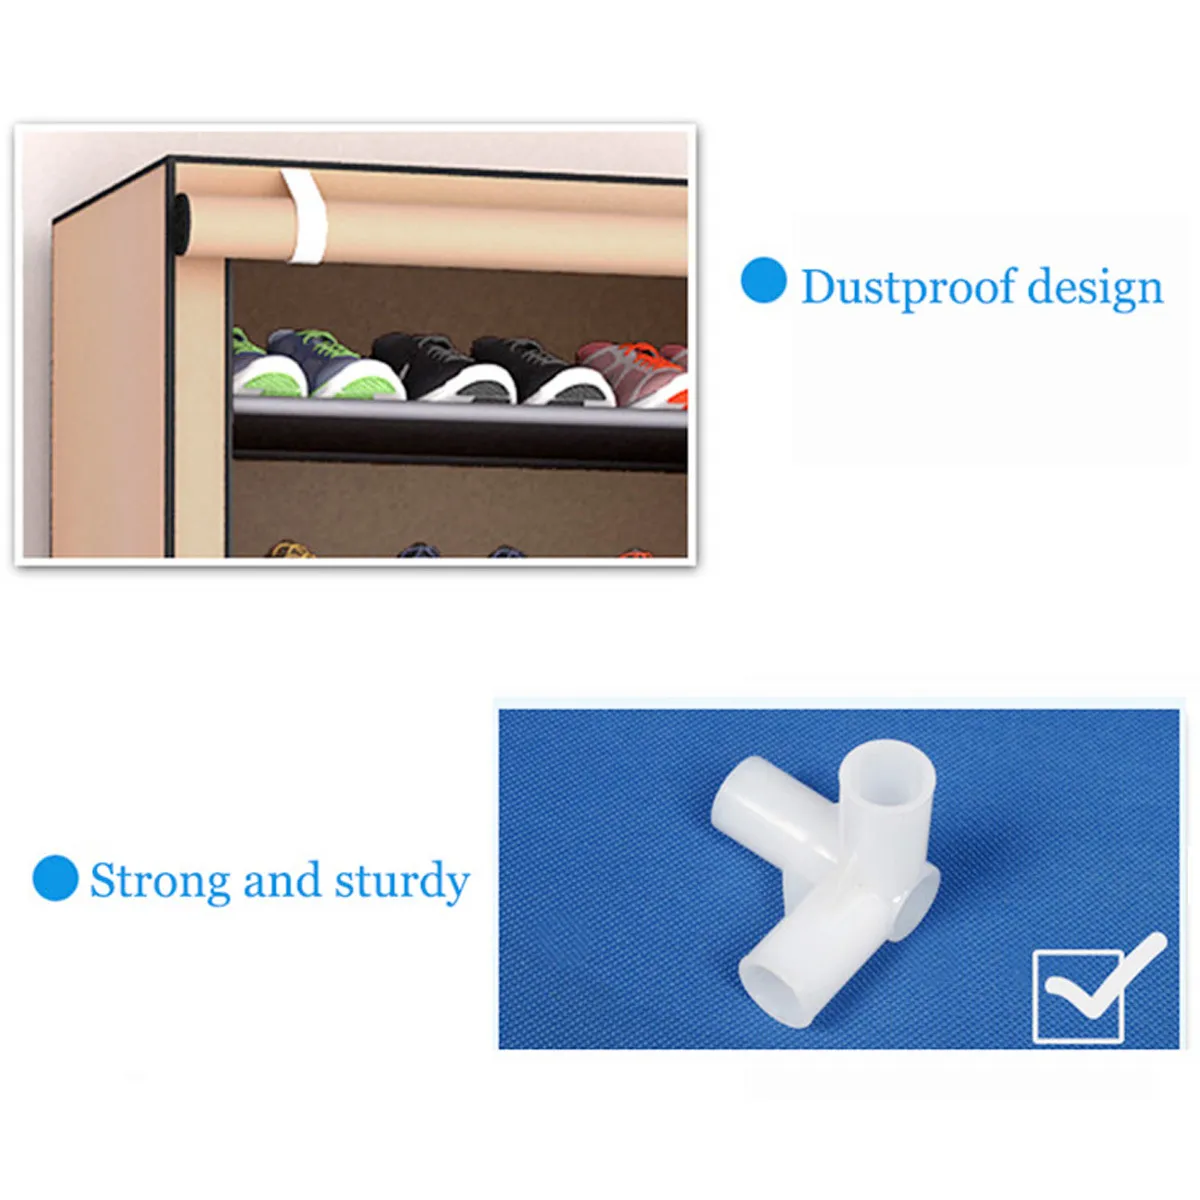 Dustproof Large Size Non-Woven Fabric Shoes Rack Shoes Organizer Home Bedroom Dormitory Shoe Racks Shelf Cabinet 4/5/6 Layers Y1128